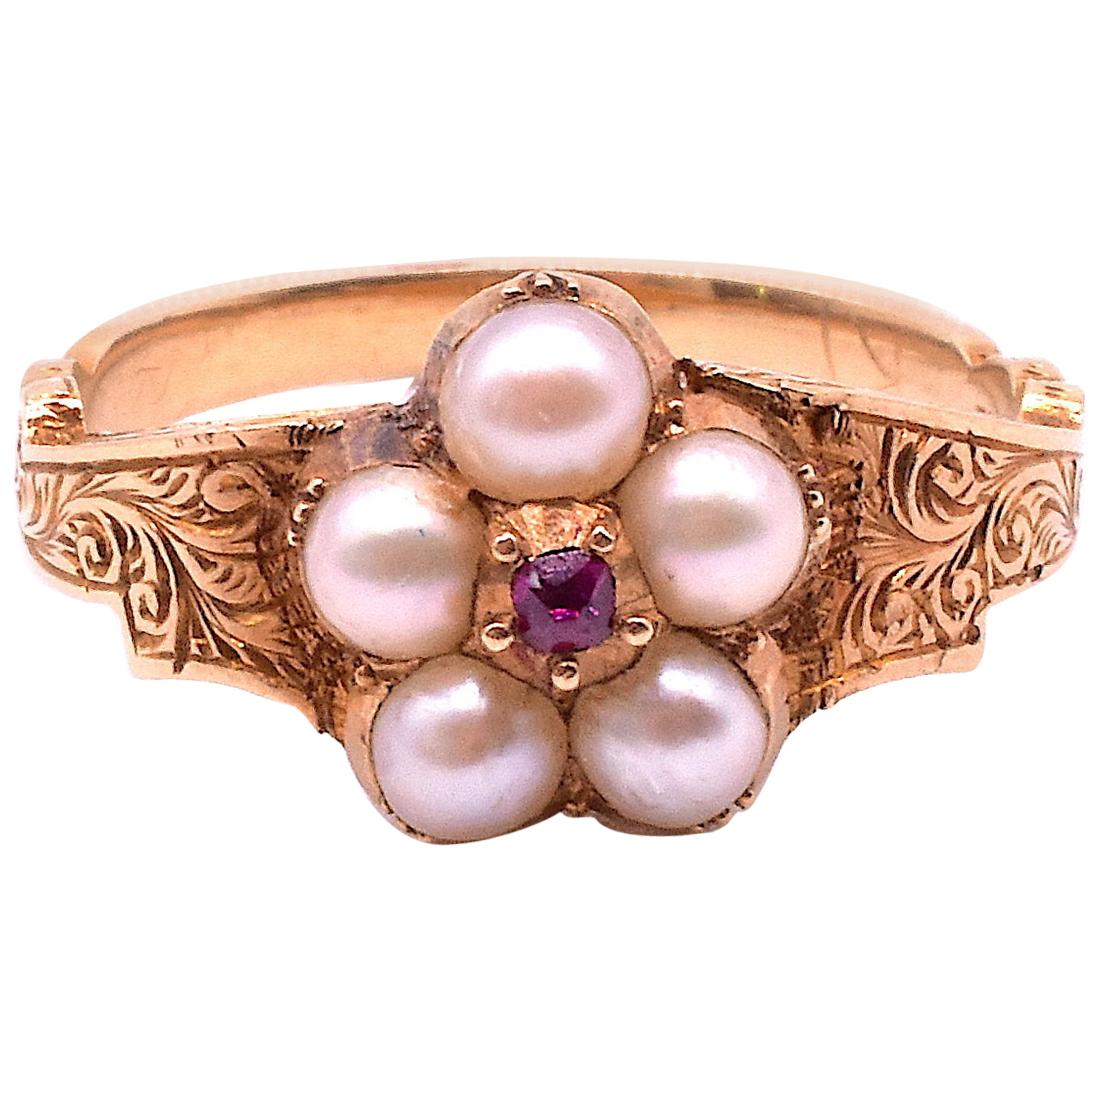 Antique Pearl Forget Me Not 18K Ring with Pink Sapphire Center, circa 1830